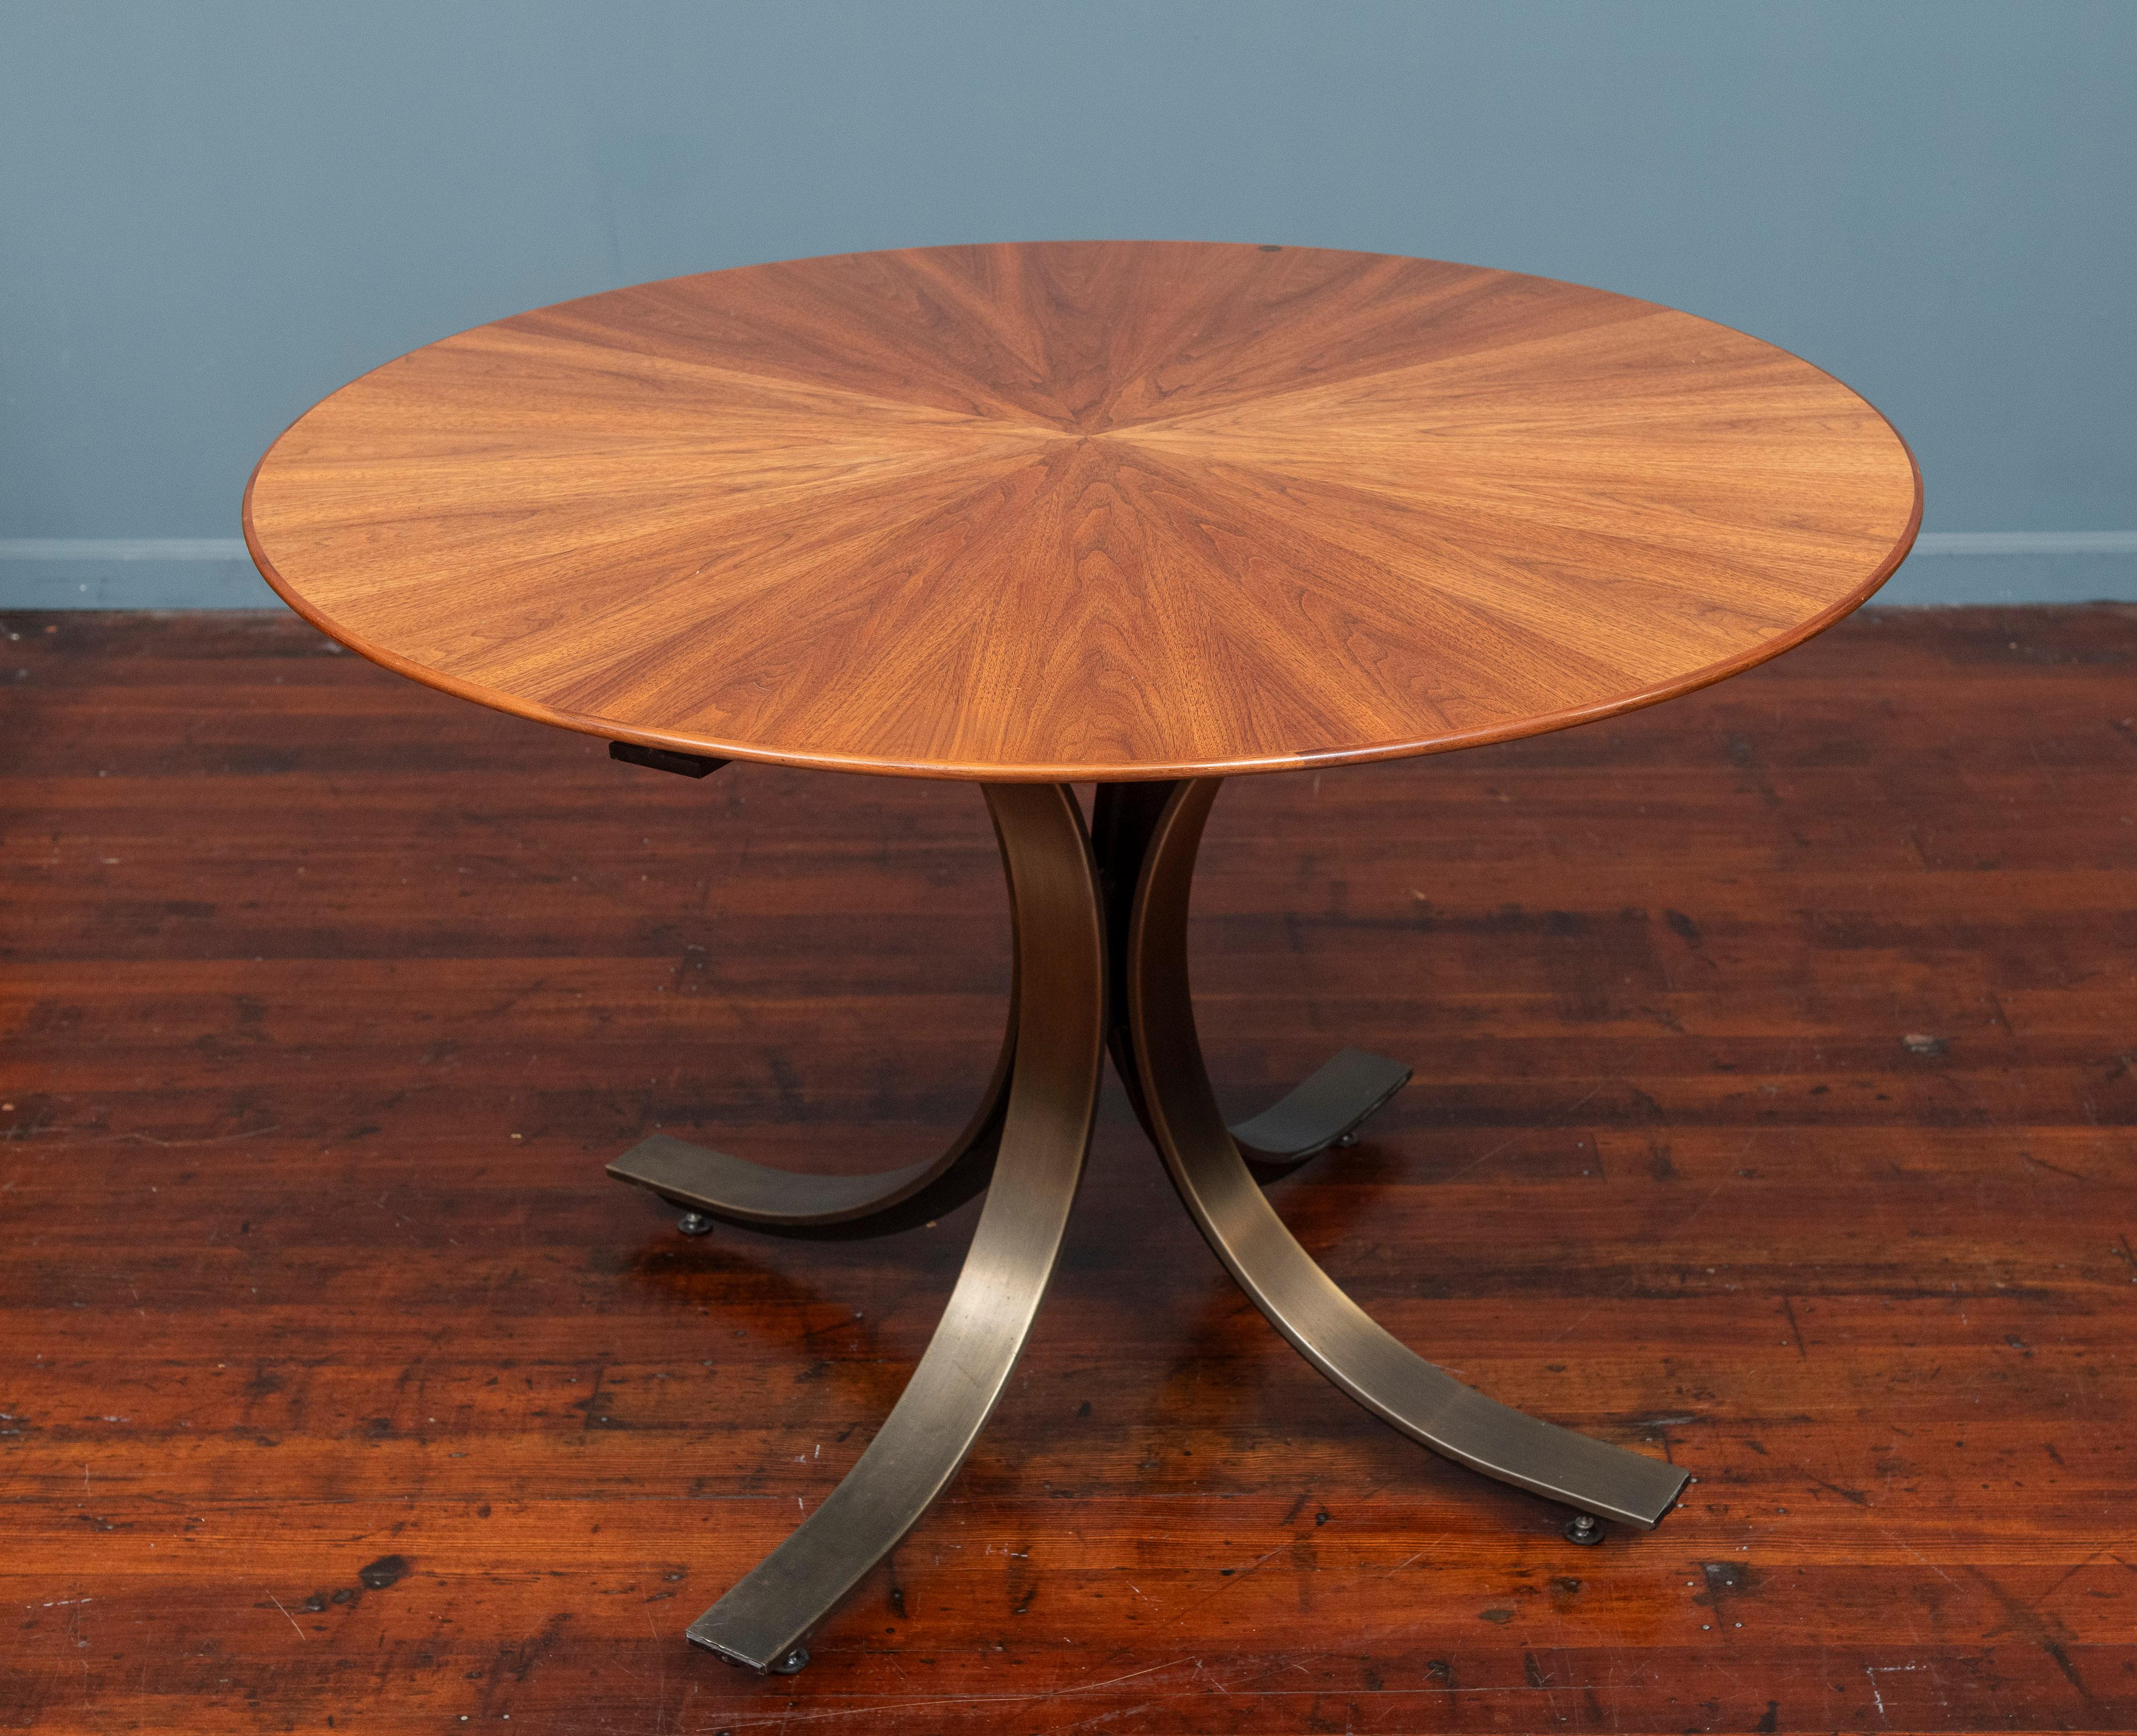 Osvaldo Borsani design small dining table or center table by Stow Davis U.S.A. Beautiful walnut starburst top on a patinated bronze wrapped steel splayed leg base. Sophisticated looking table with a newly refinished top on a solid heavy base, ready